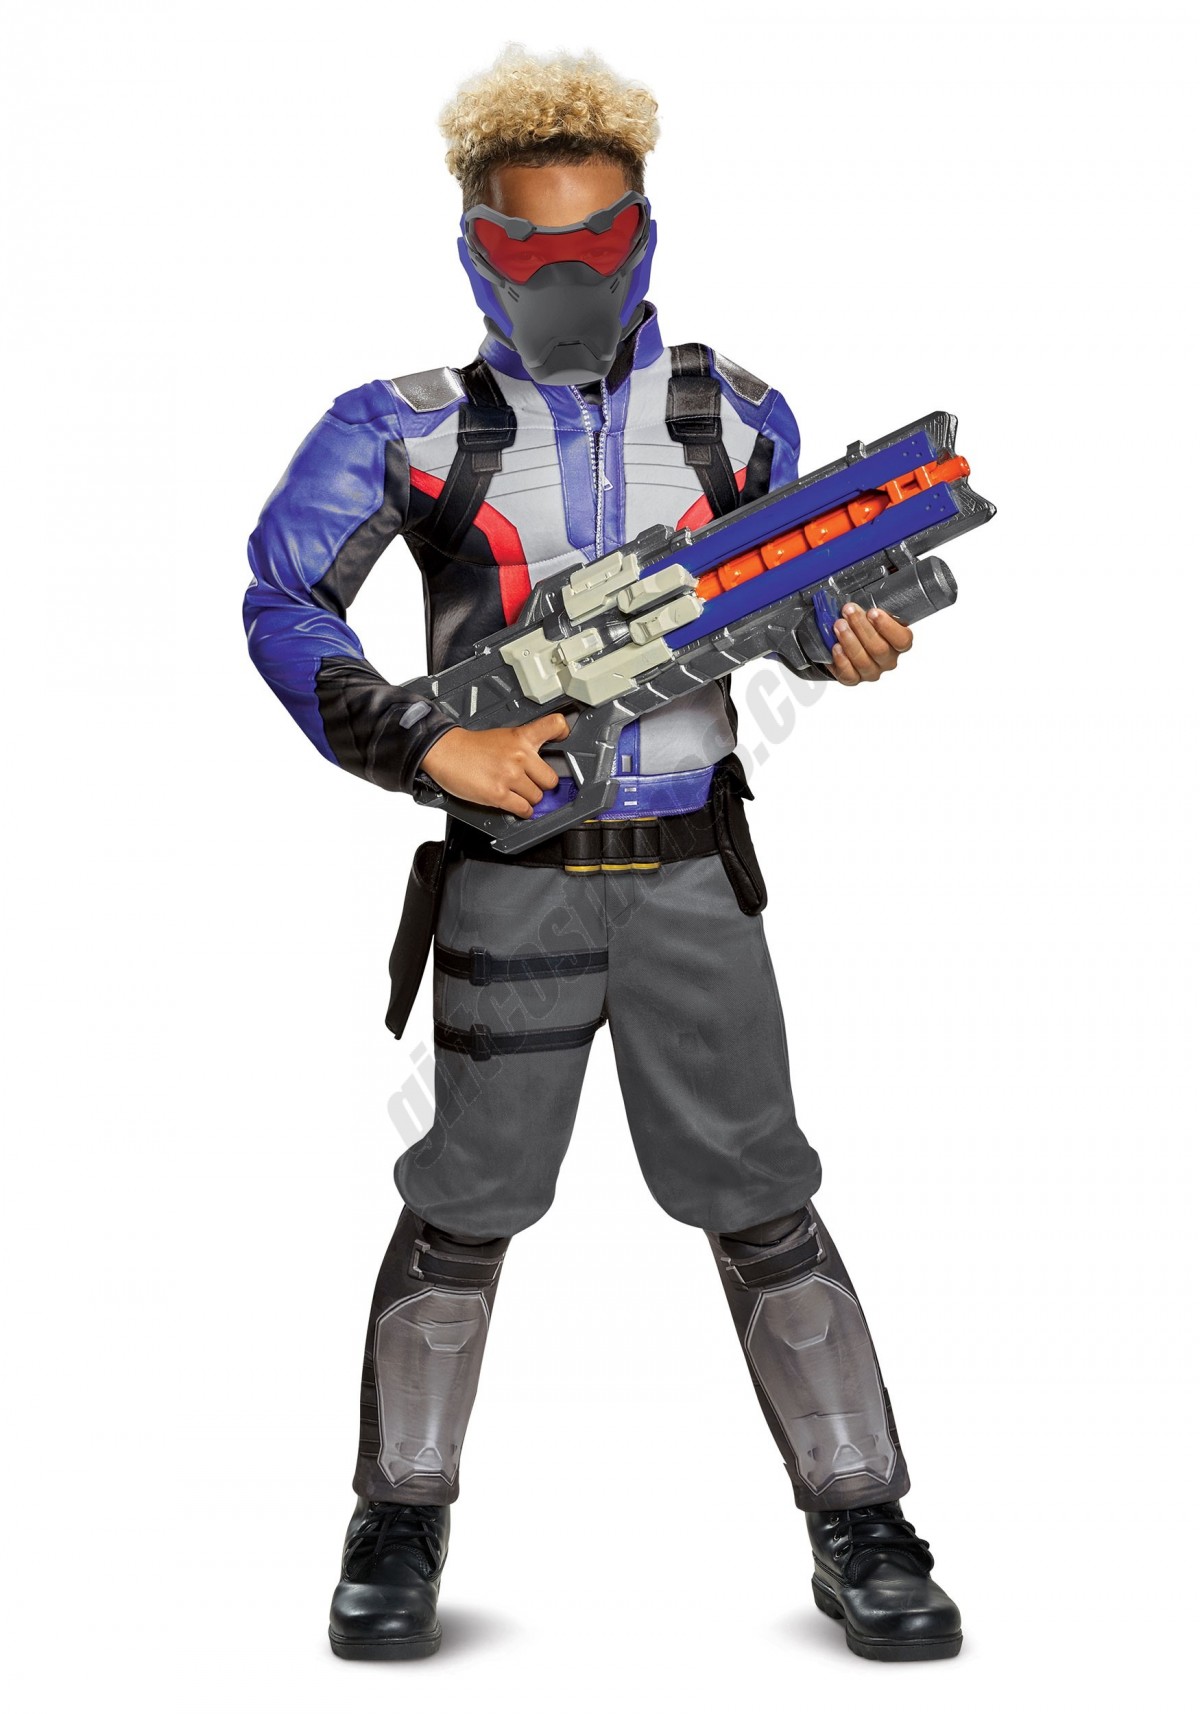 Overwatch Soldier 76 Pulse Rifle Accessory Promotions - -2